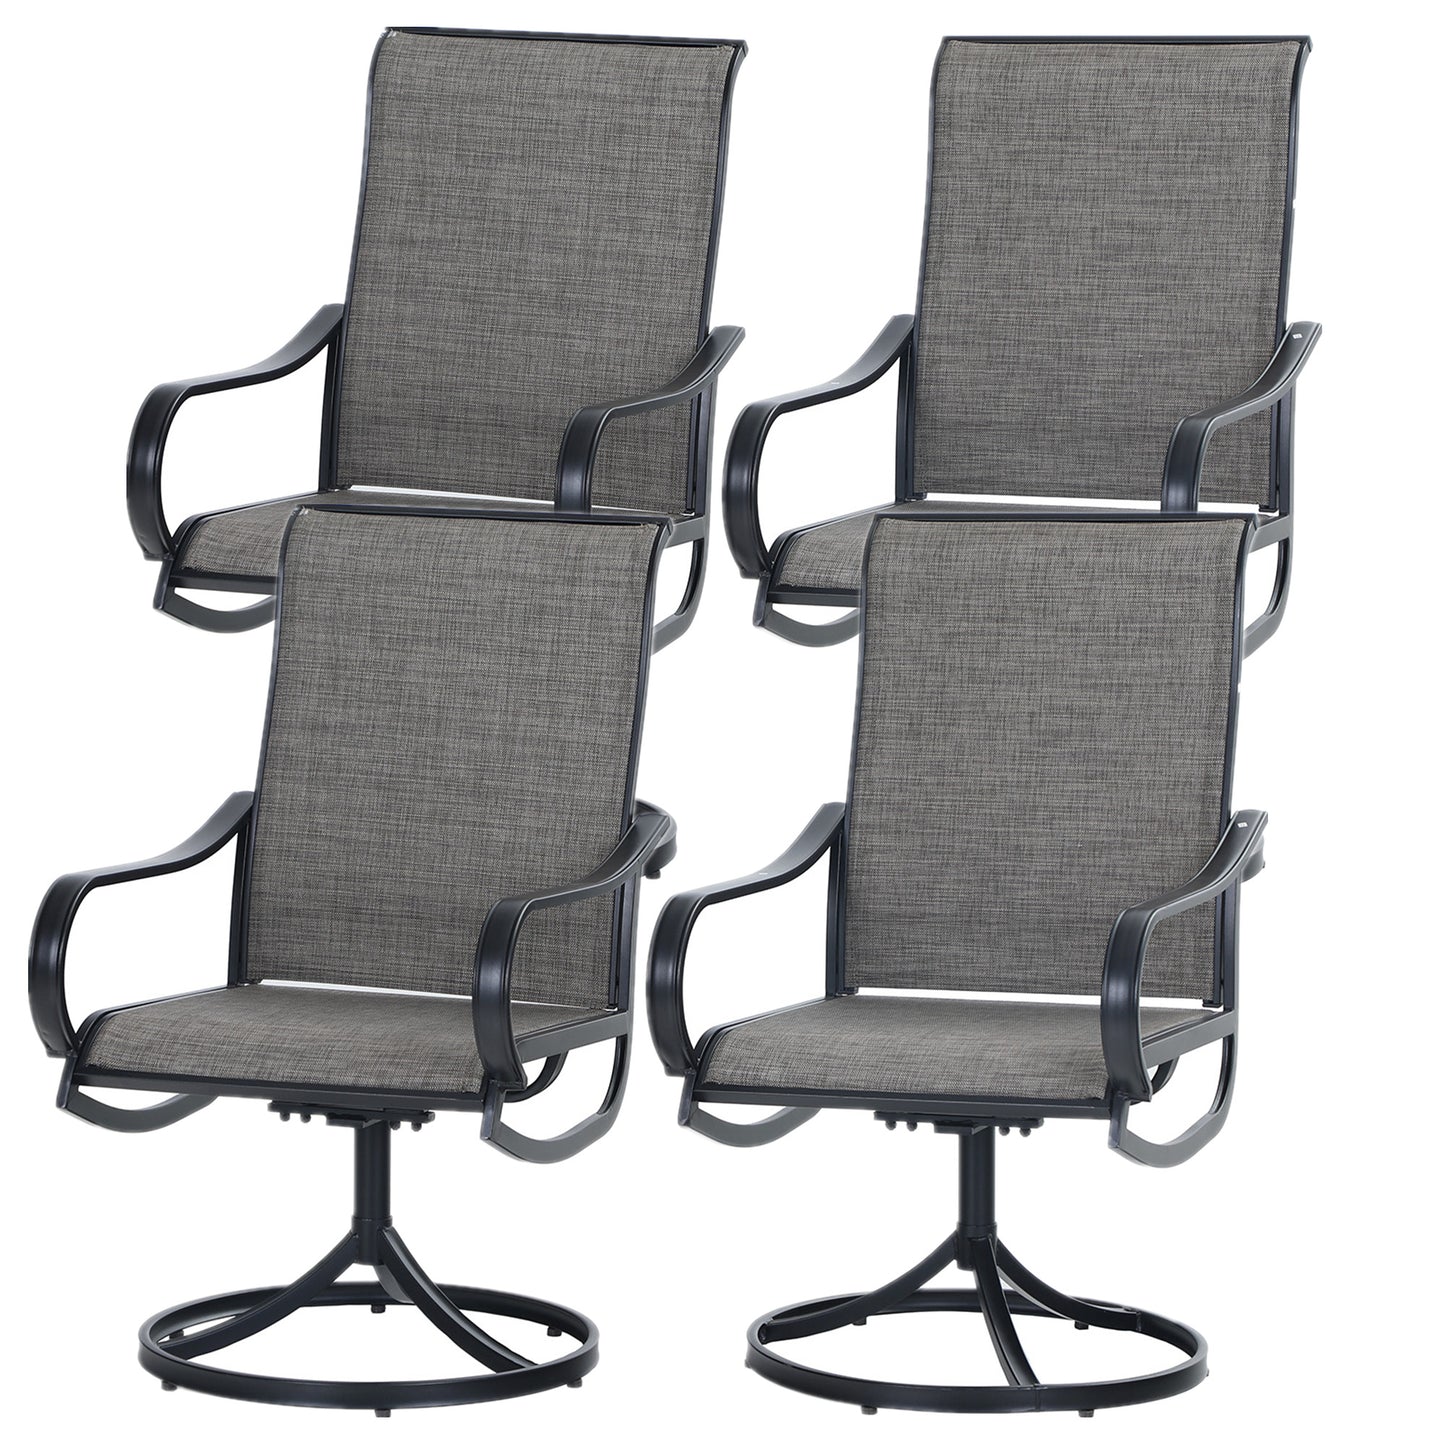 Sophia & William 4Pcs Patio Dining Swivel Chairs Set with Black Steel Frame